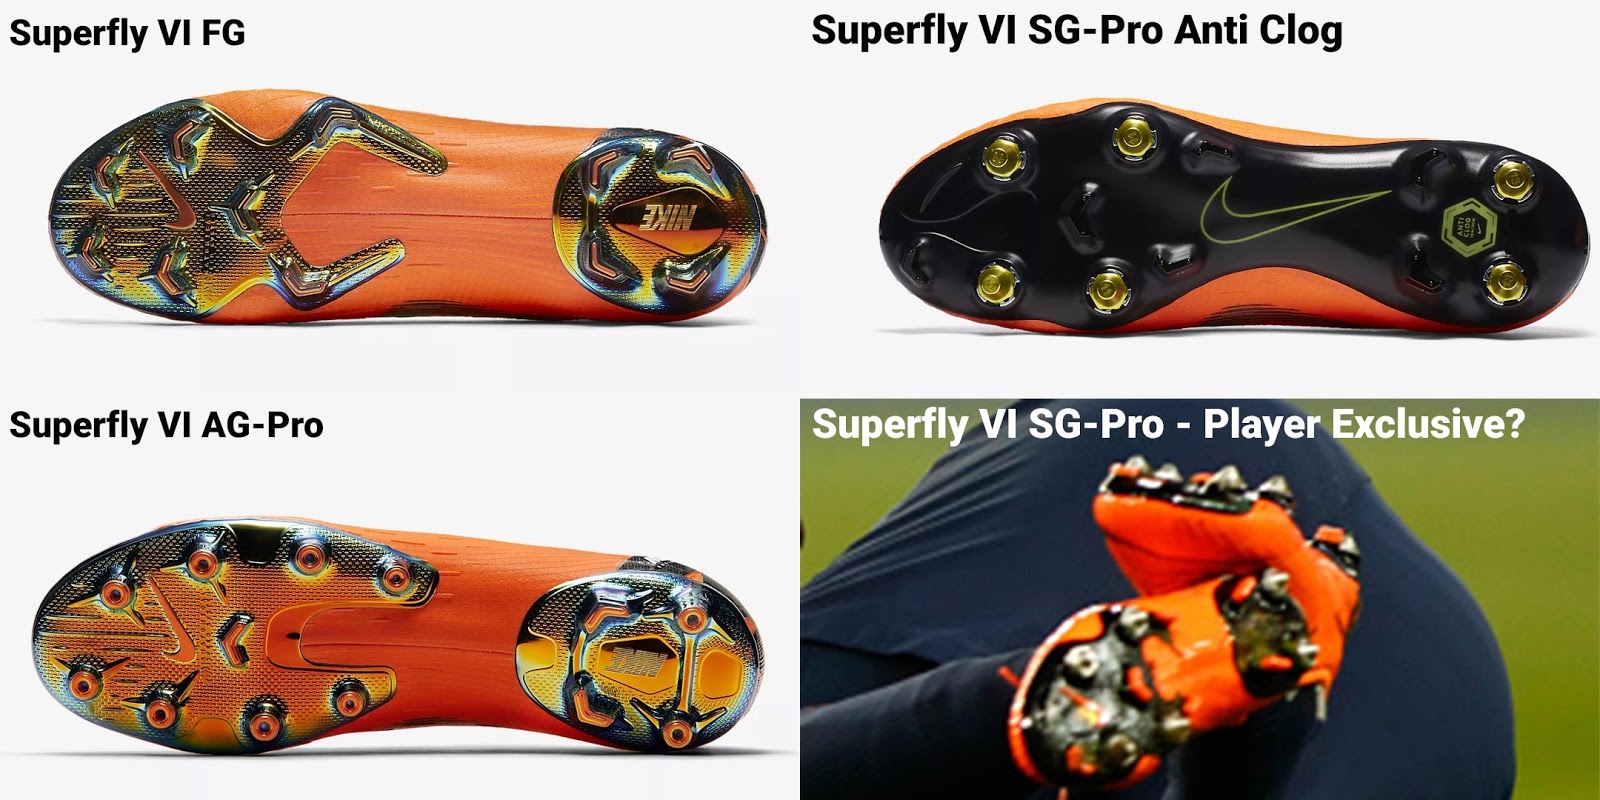 Version Without Sole Plate Only For CR7, Neymar & Co? Nike Mercurial Superfly & Vapor 360 2018 Boots - FG vs AG vs SG-Pro Anti-Clog Versions - Footy Headlines